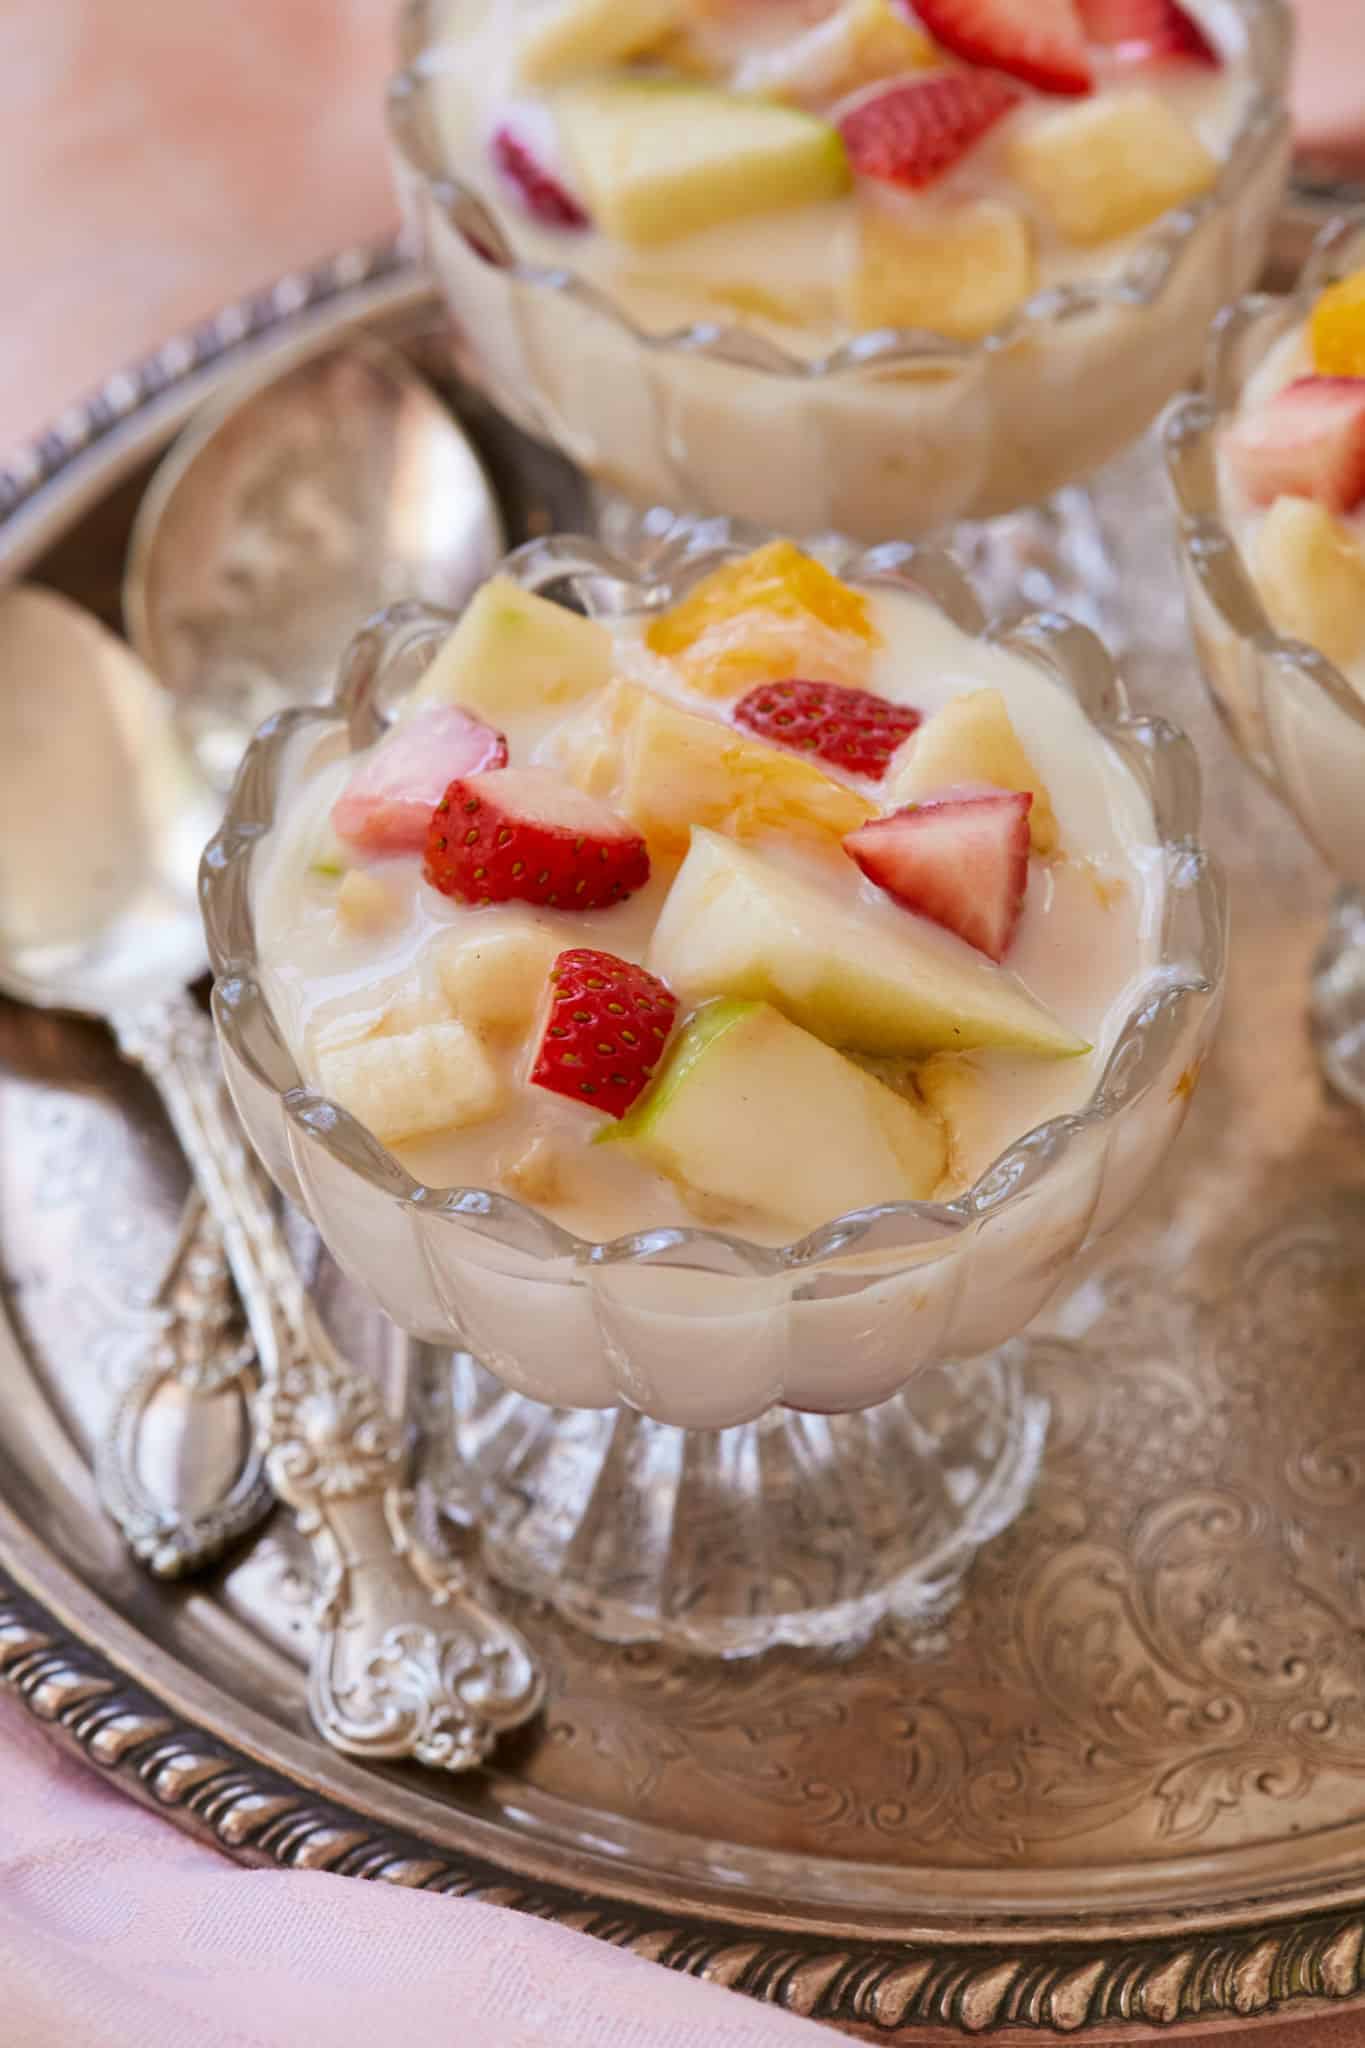 Fresh seasonal fruit, including apples, strawberries, and bananas, in a bowl with custard.